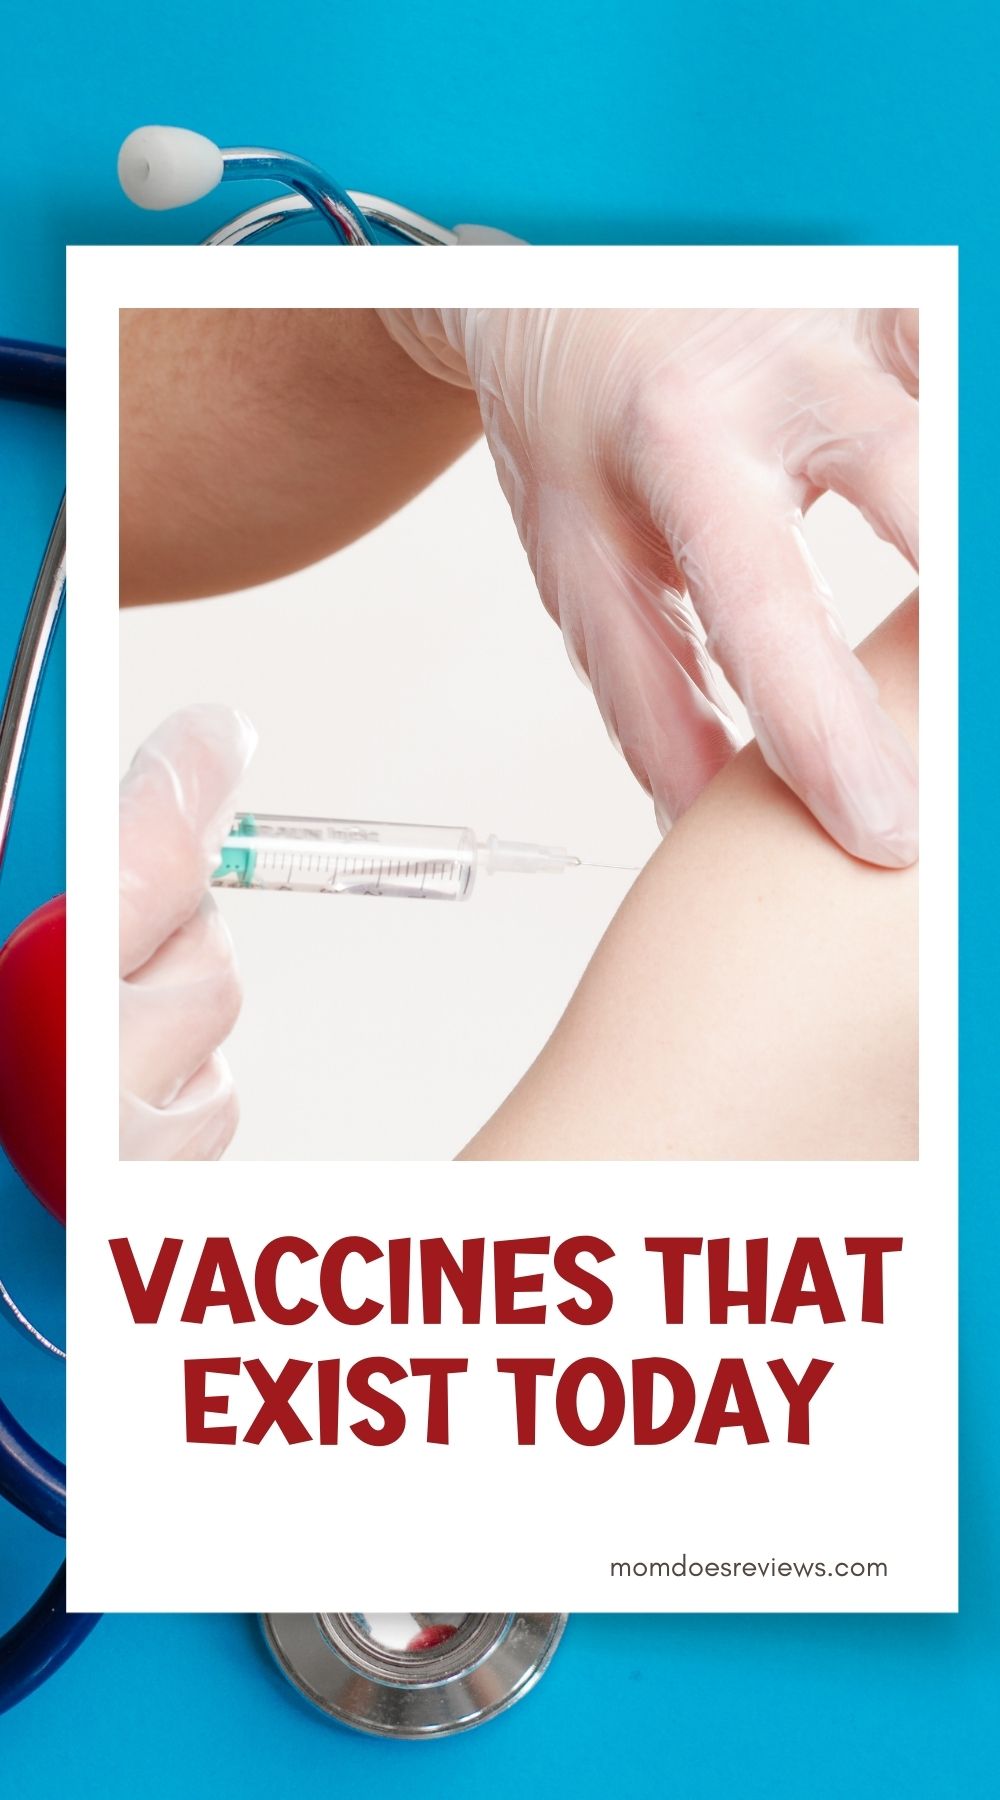 Essays on Vaccination: What Vaccines Now Exist